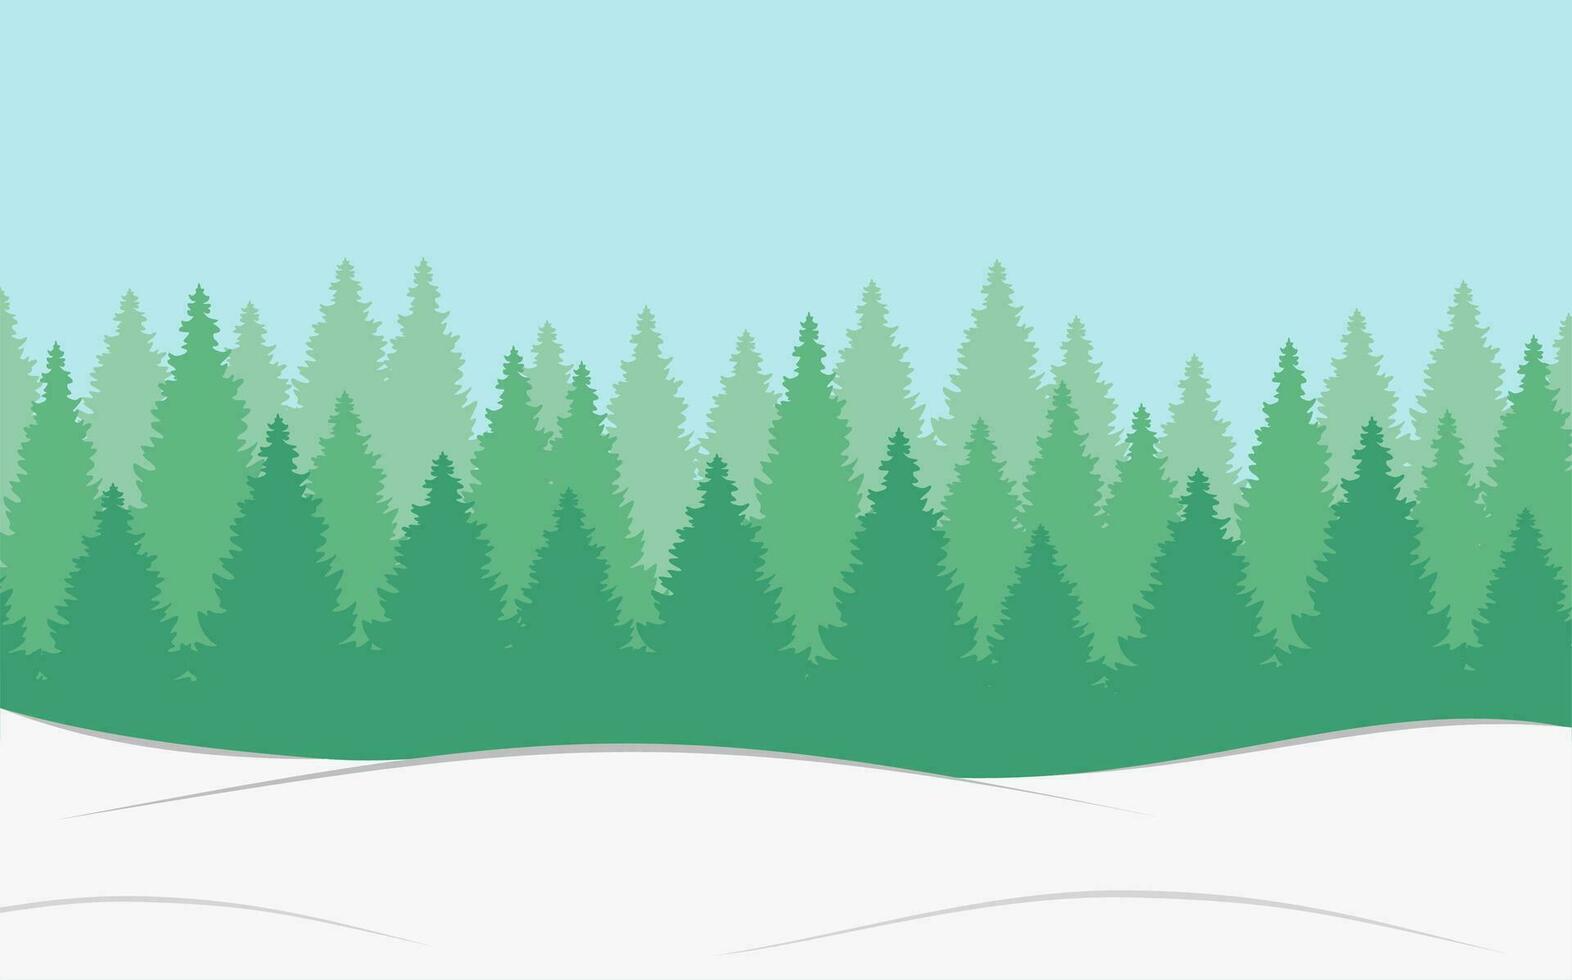 Fir snow forest. Winter landscape. Christmas trees. Holiday card. Happy New Year vector illustration.